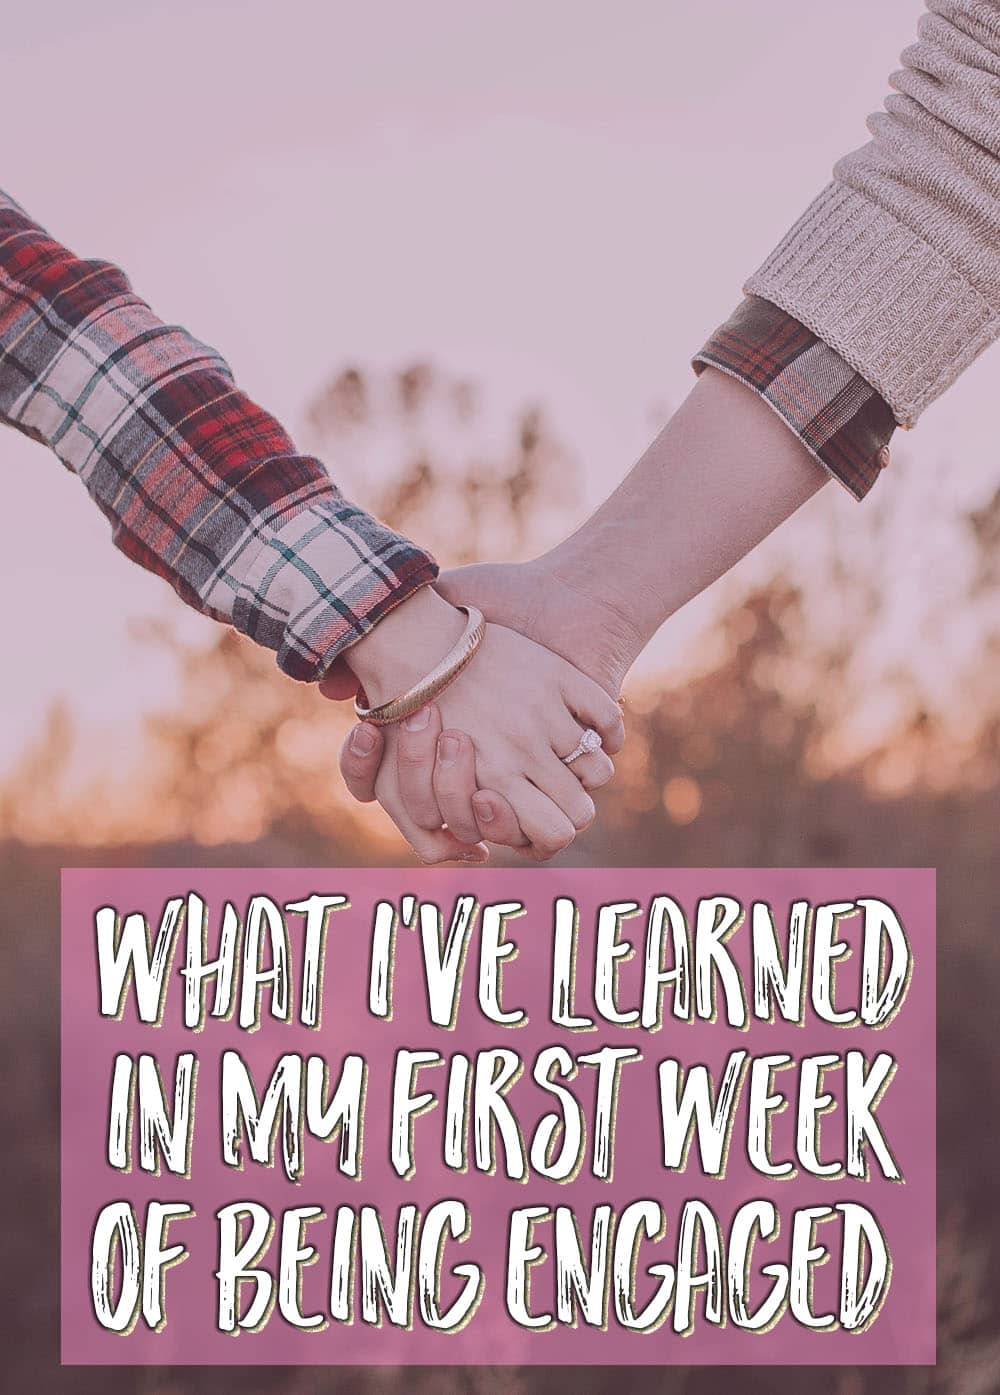 What I've learned in my first week of being engaged // stephanieorefice.net